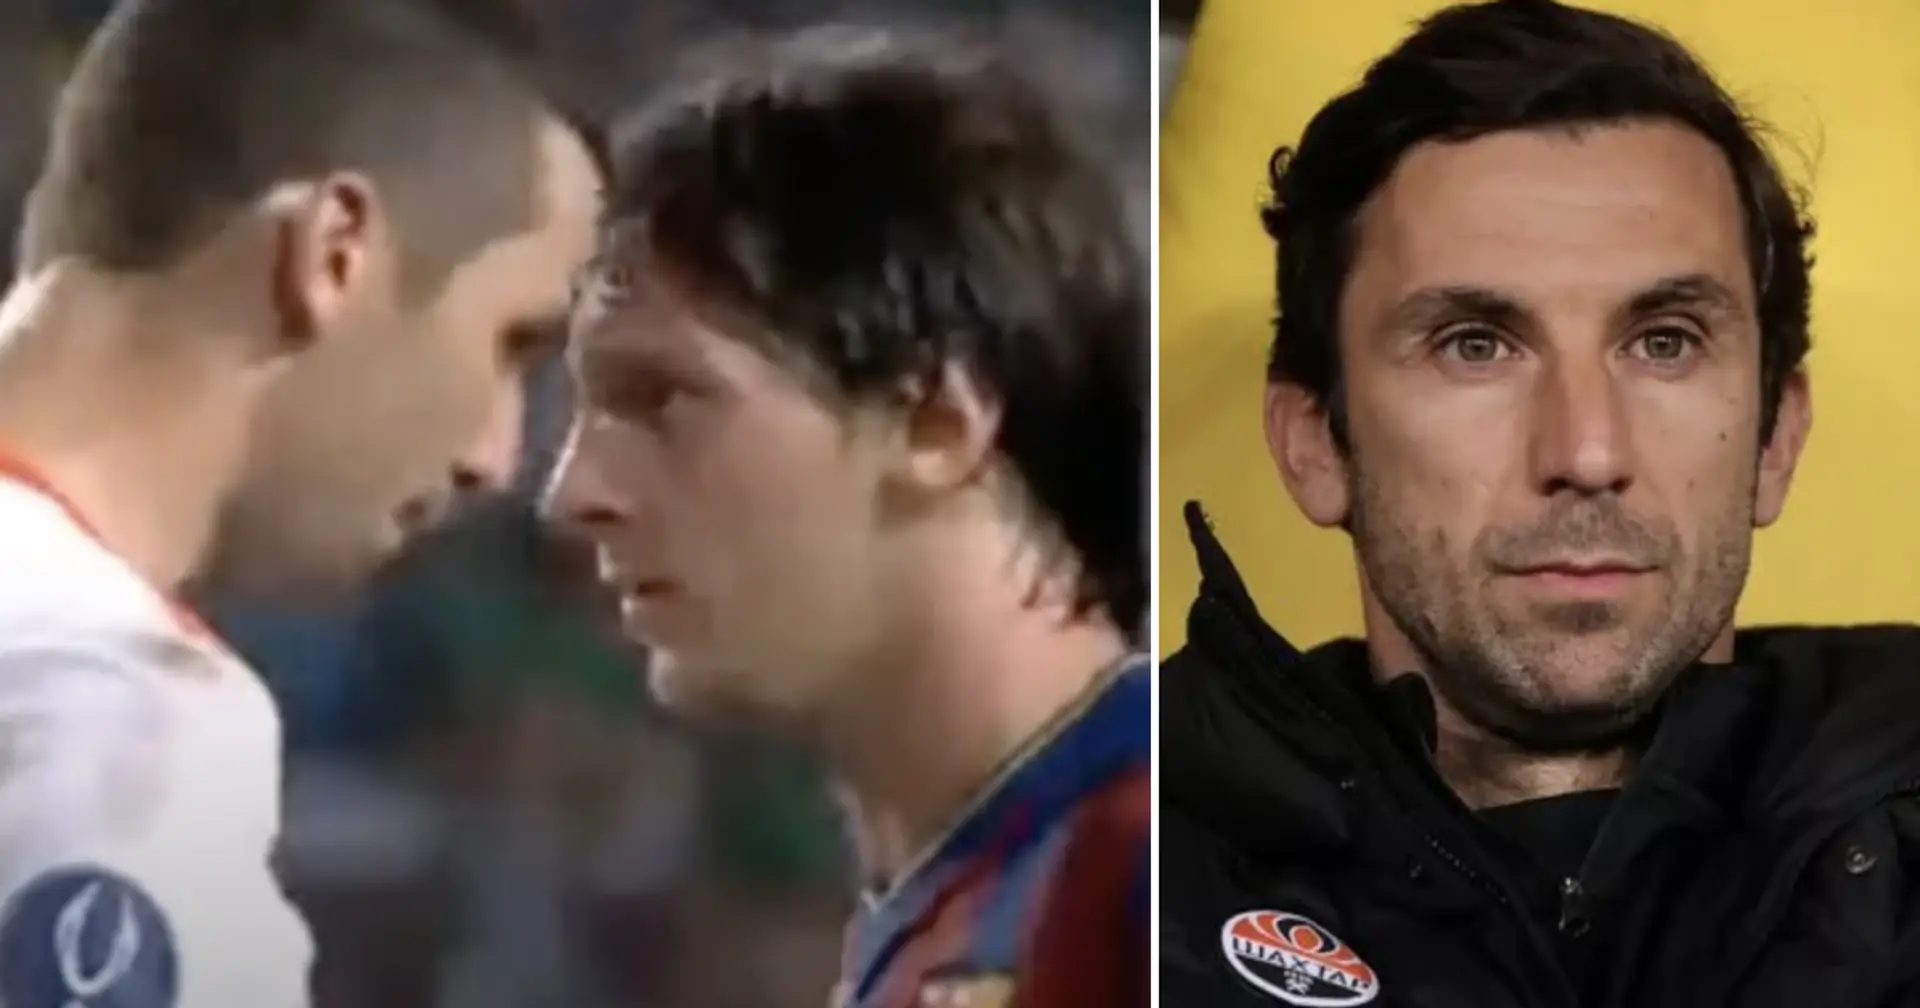 Shakhtar hires new coach week before Barca clash - he fought with Messi once